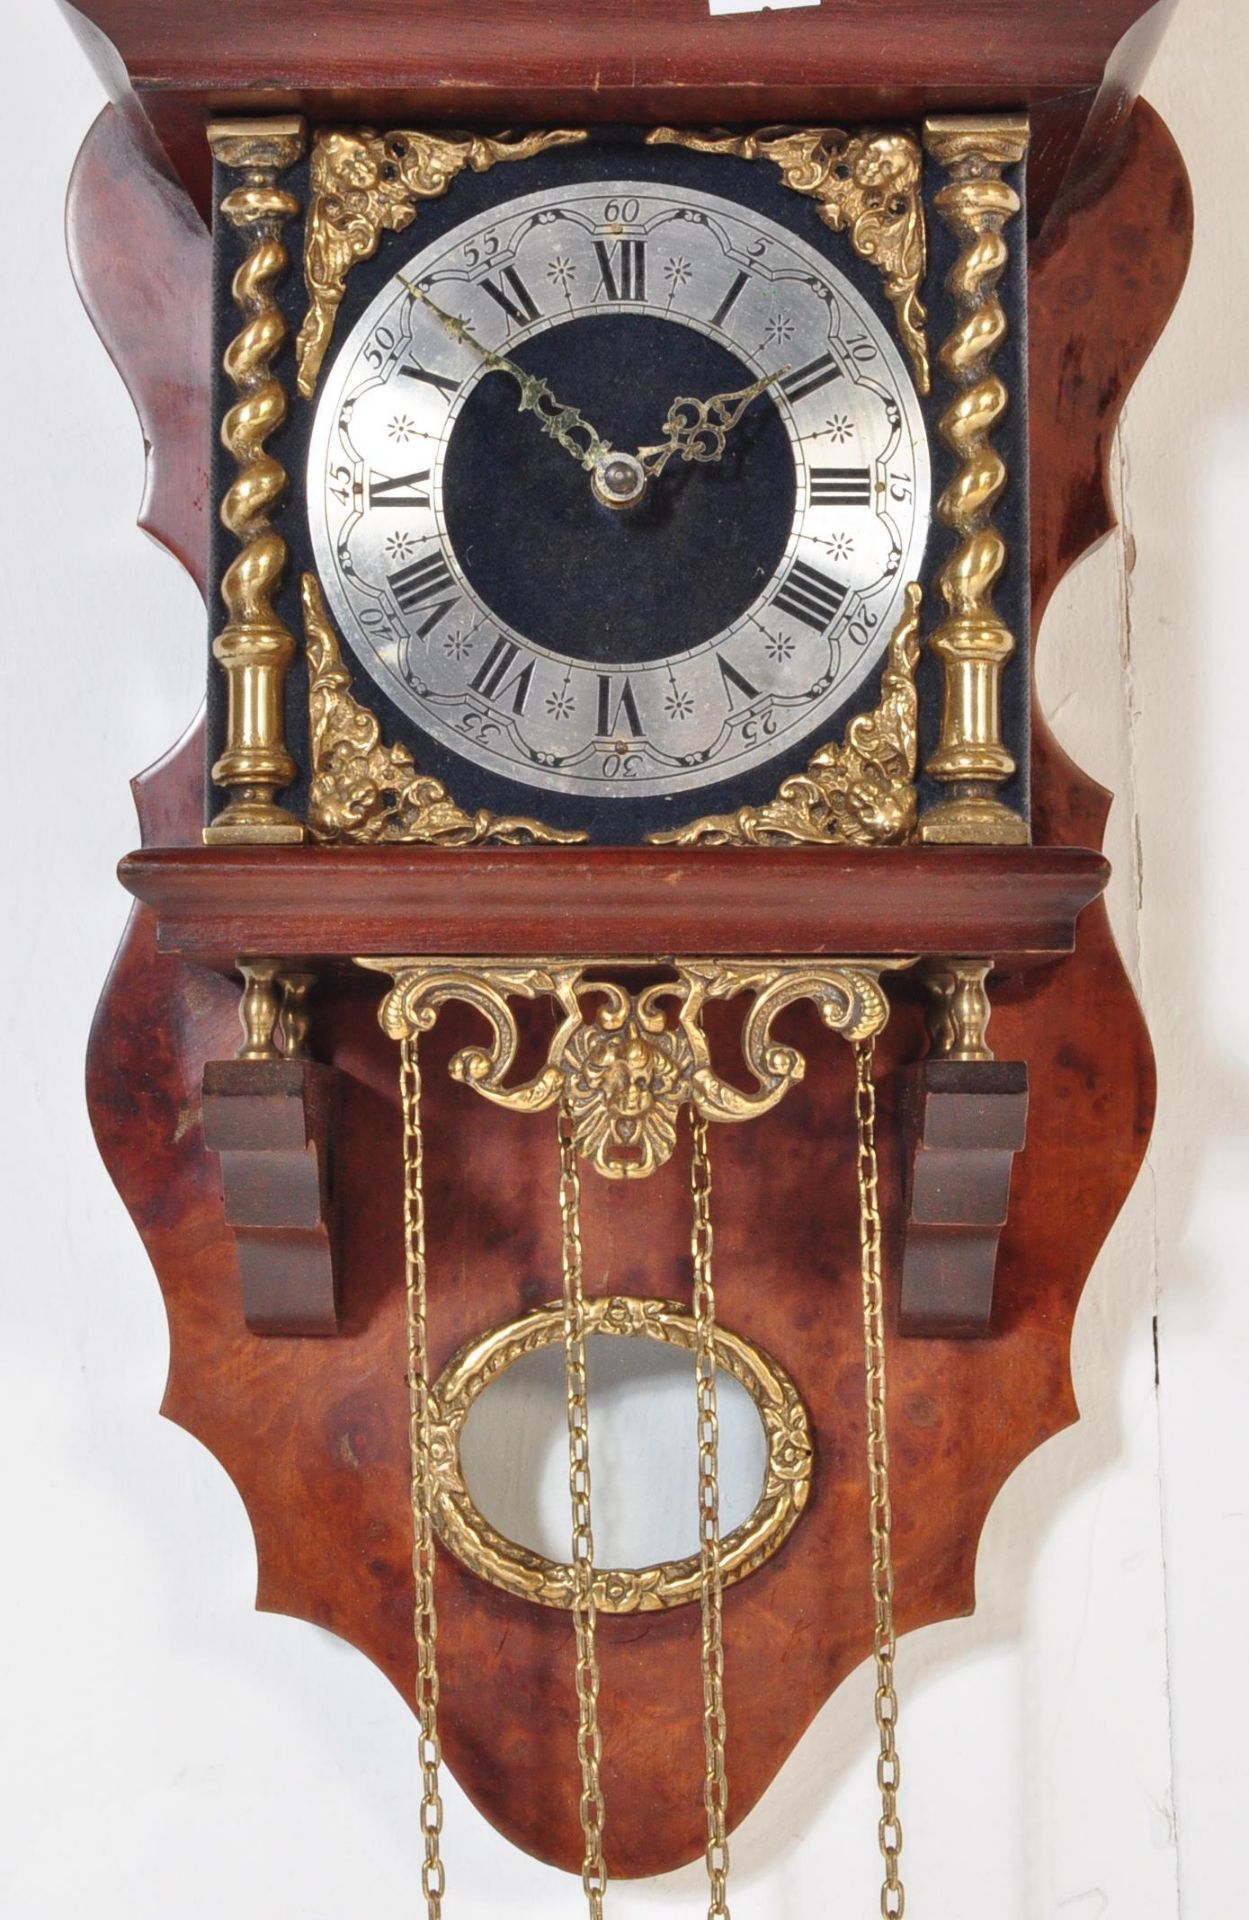 20TH CENTURY REPRODUCTION DUTCH WALL CLOCK - Image 5 of 9